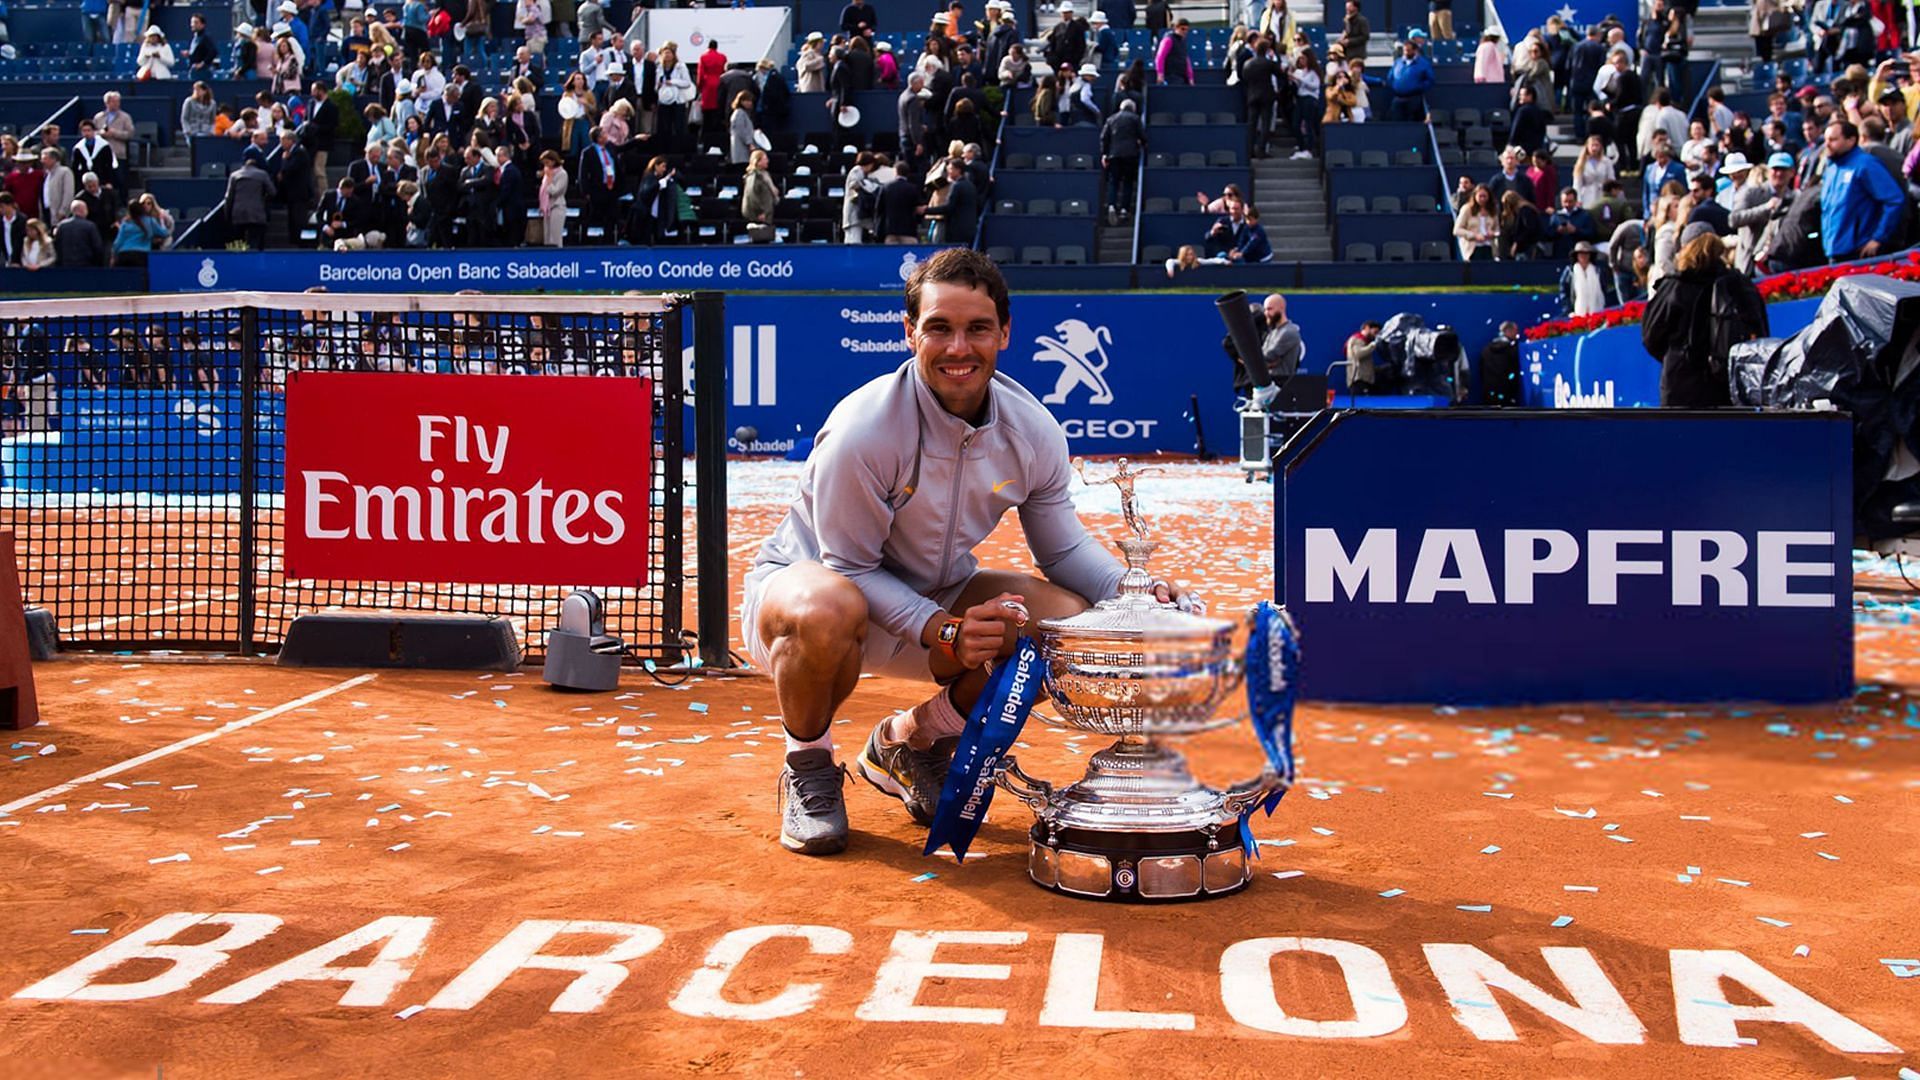 Rafael Nadal with the title at the Barcelona Open in 2021